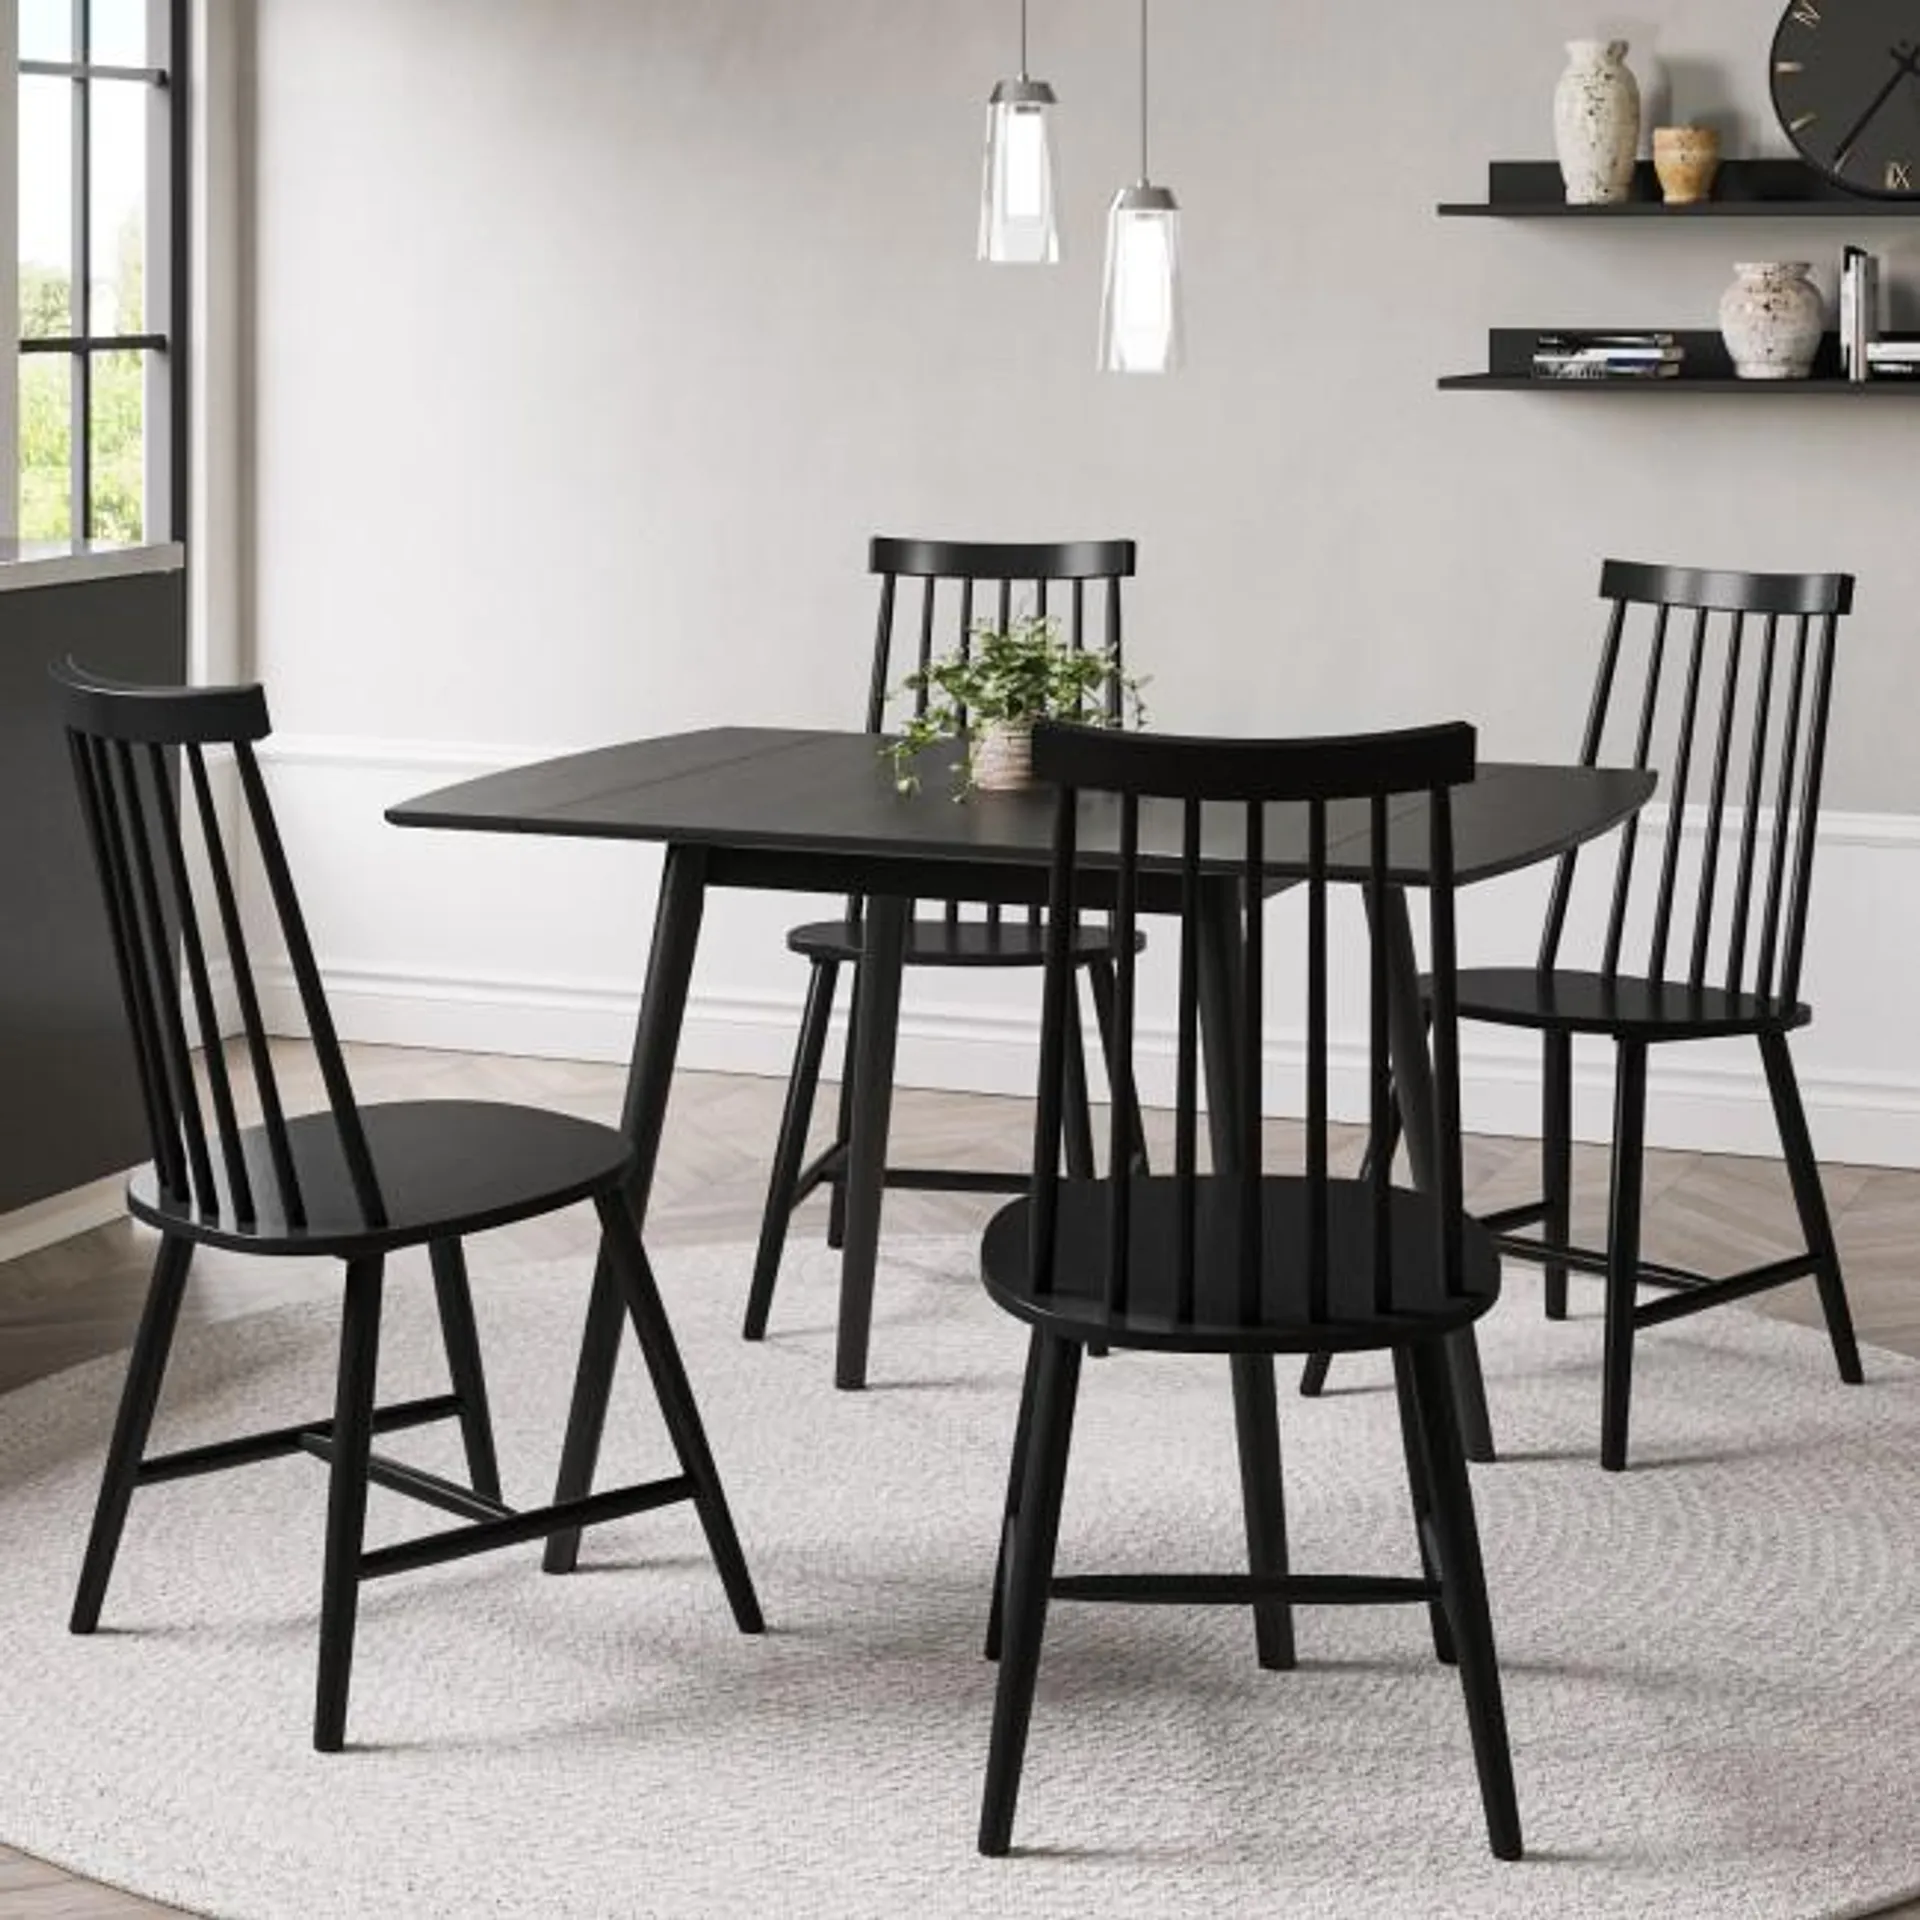 Black Drop Leaf Dining Table with 4 Black Spindle Dining Chairs- Olsen